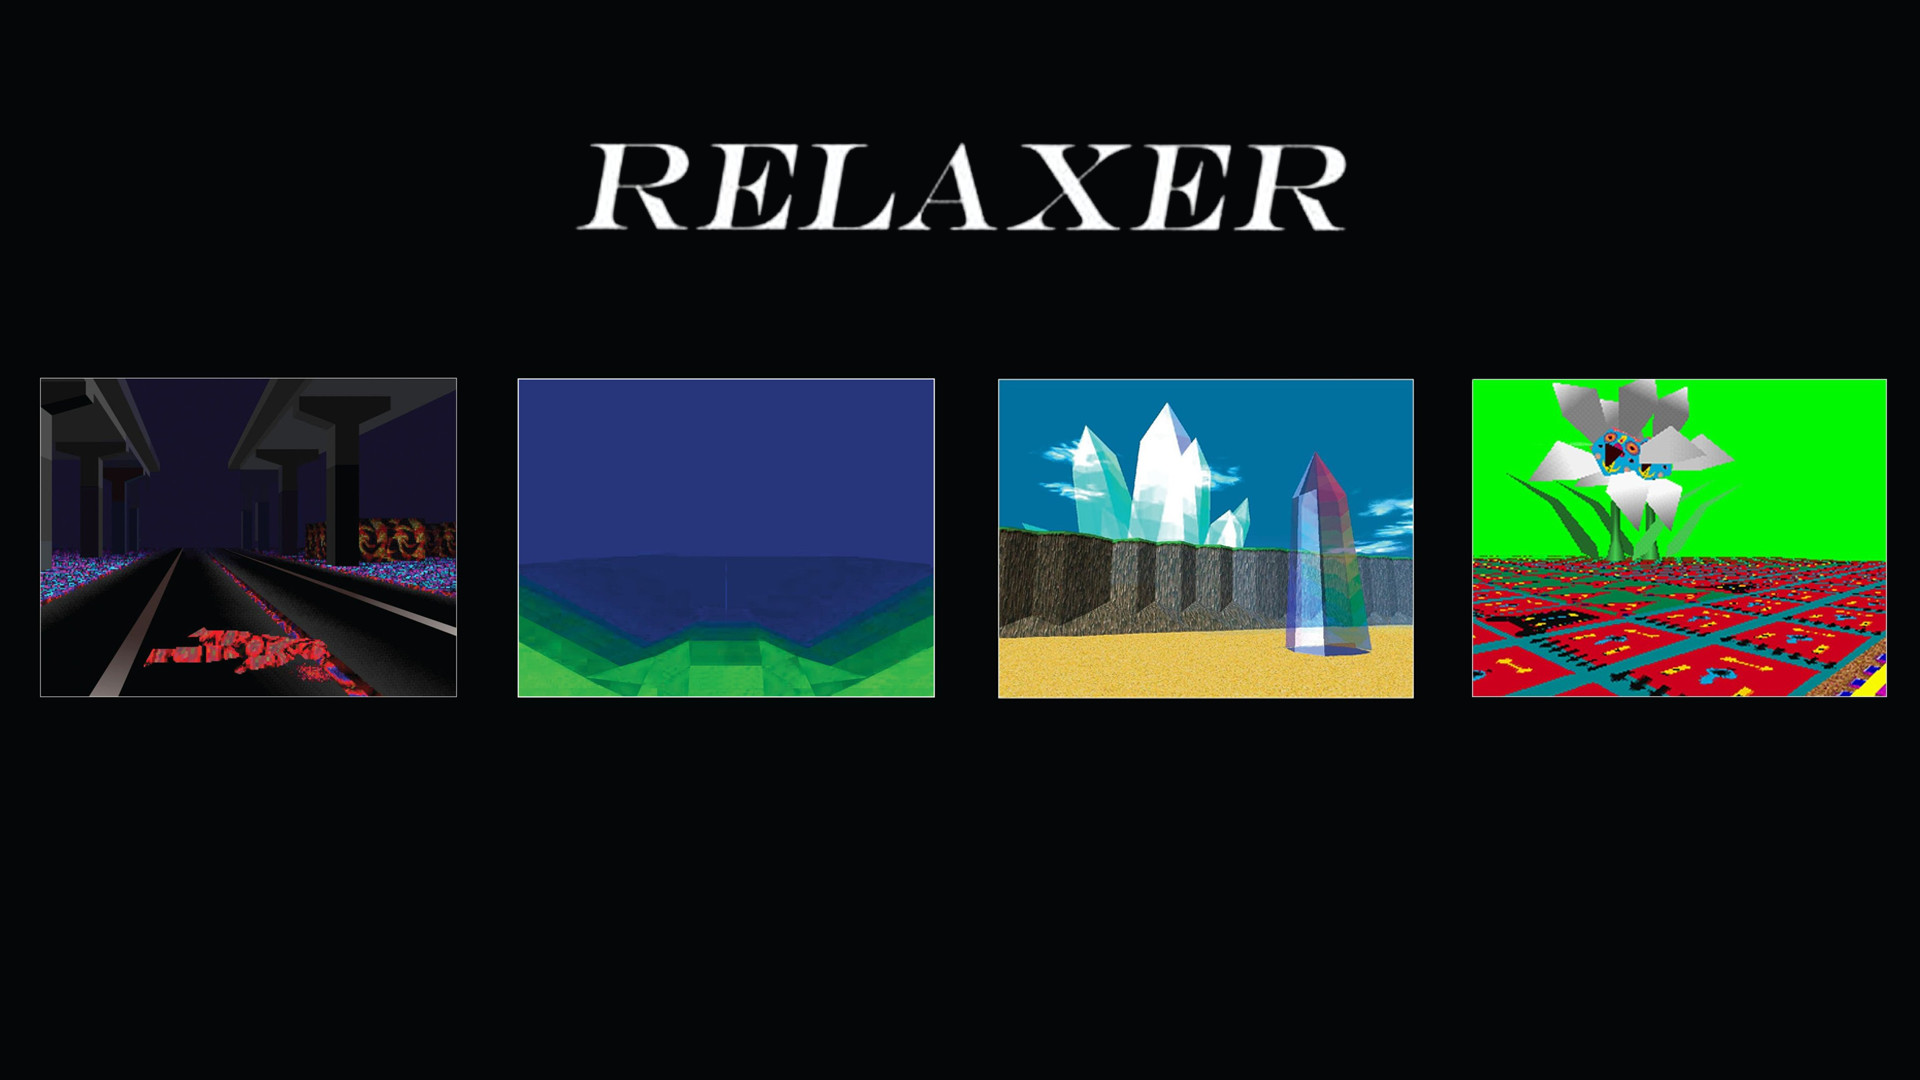 1920x1080 Desktop background I made with the album covers from Relaxer and its  singles ...